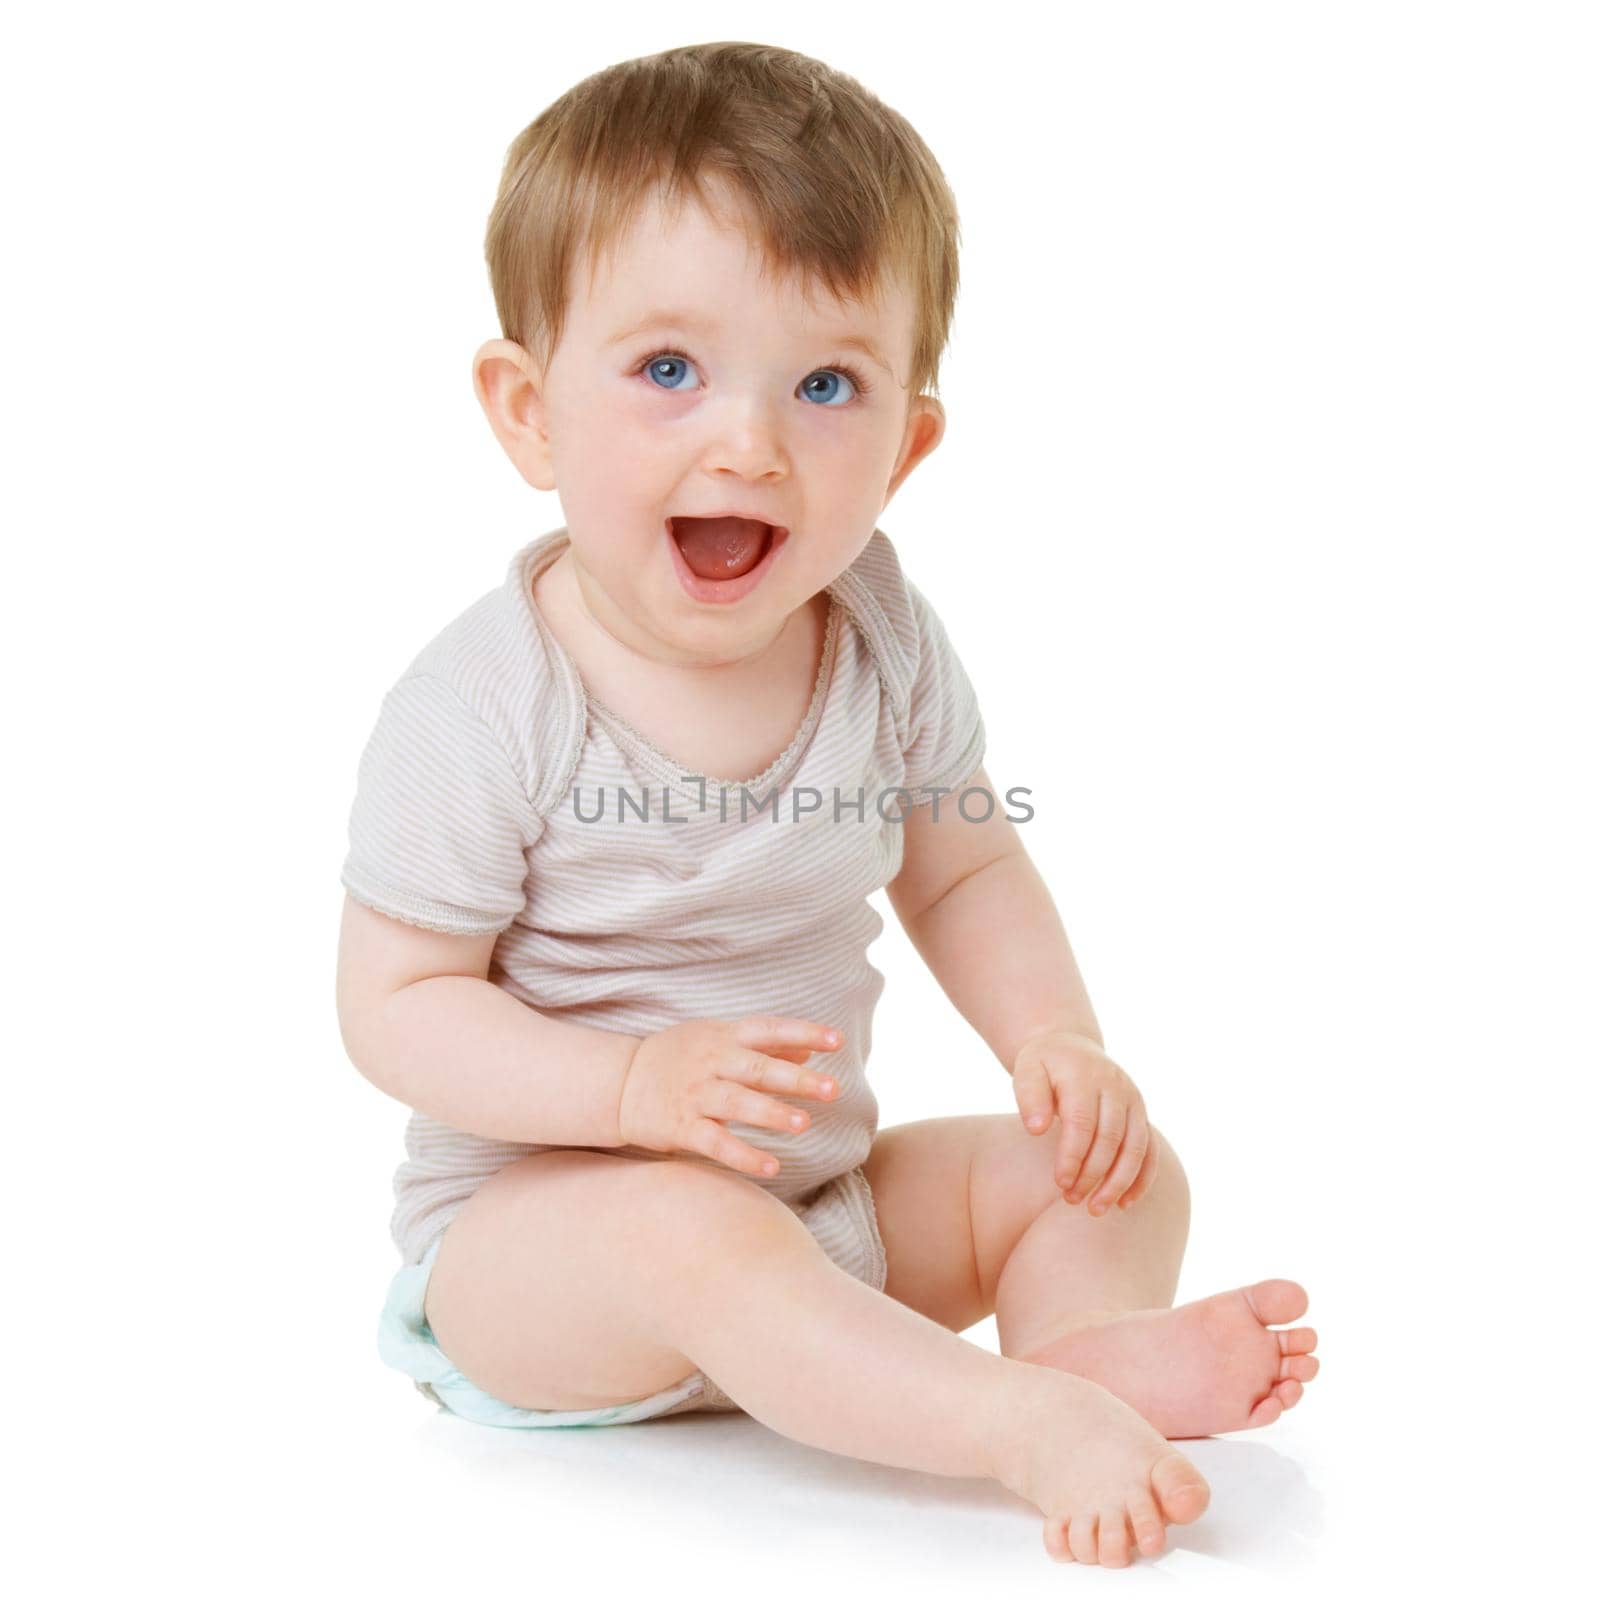 An adorable baby sitting down and laughing isolated on white.